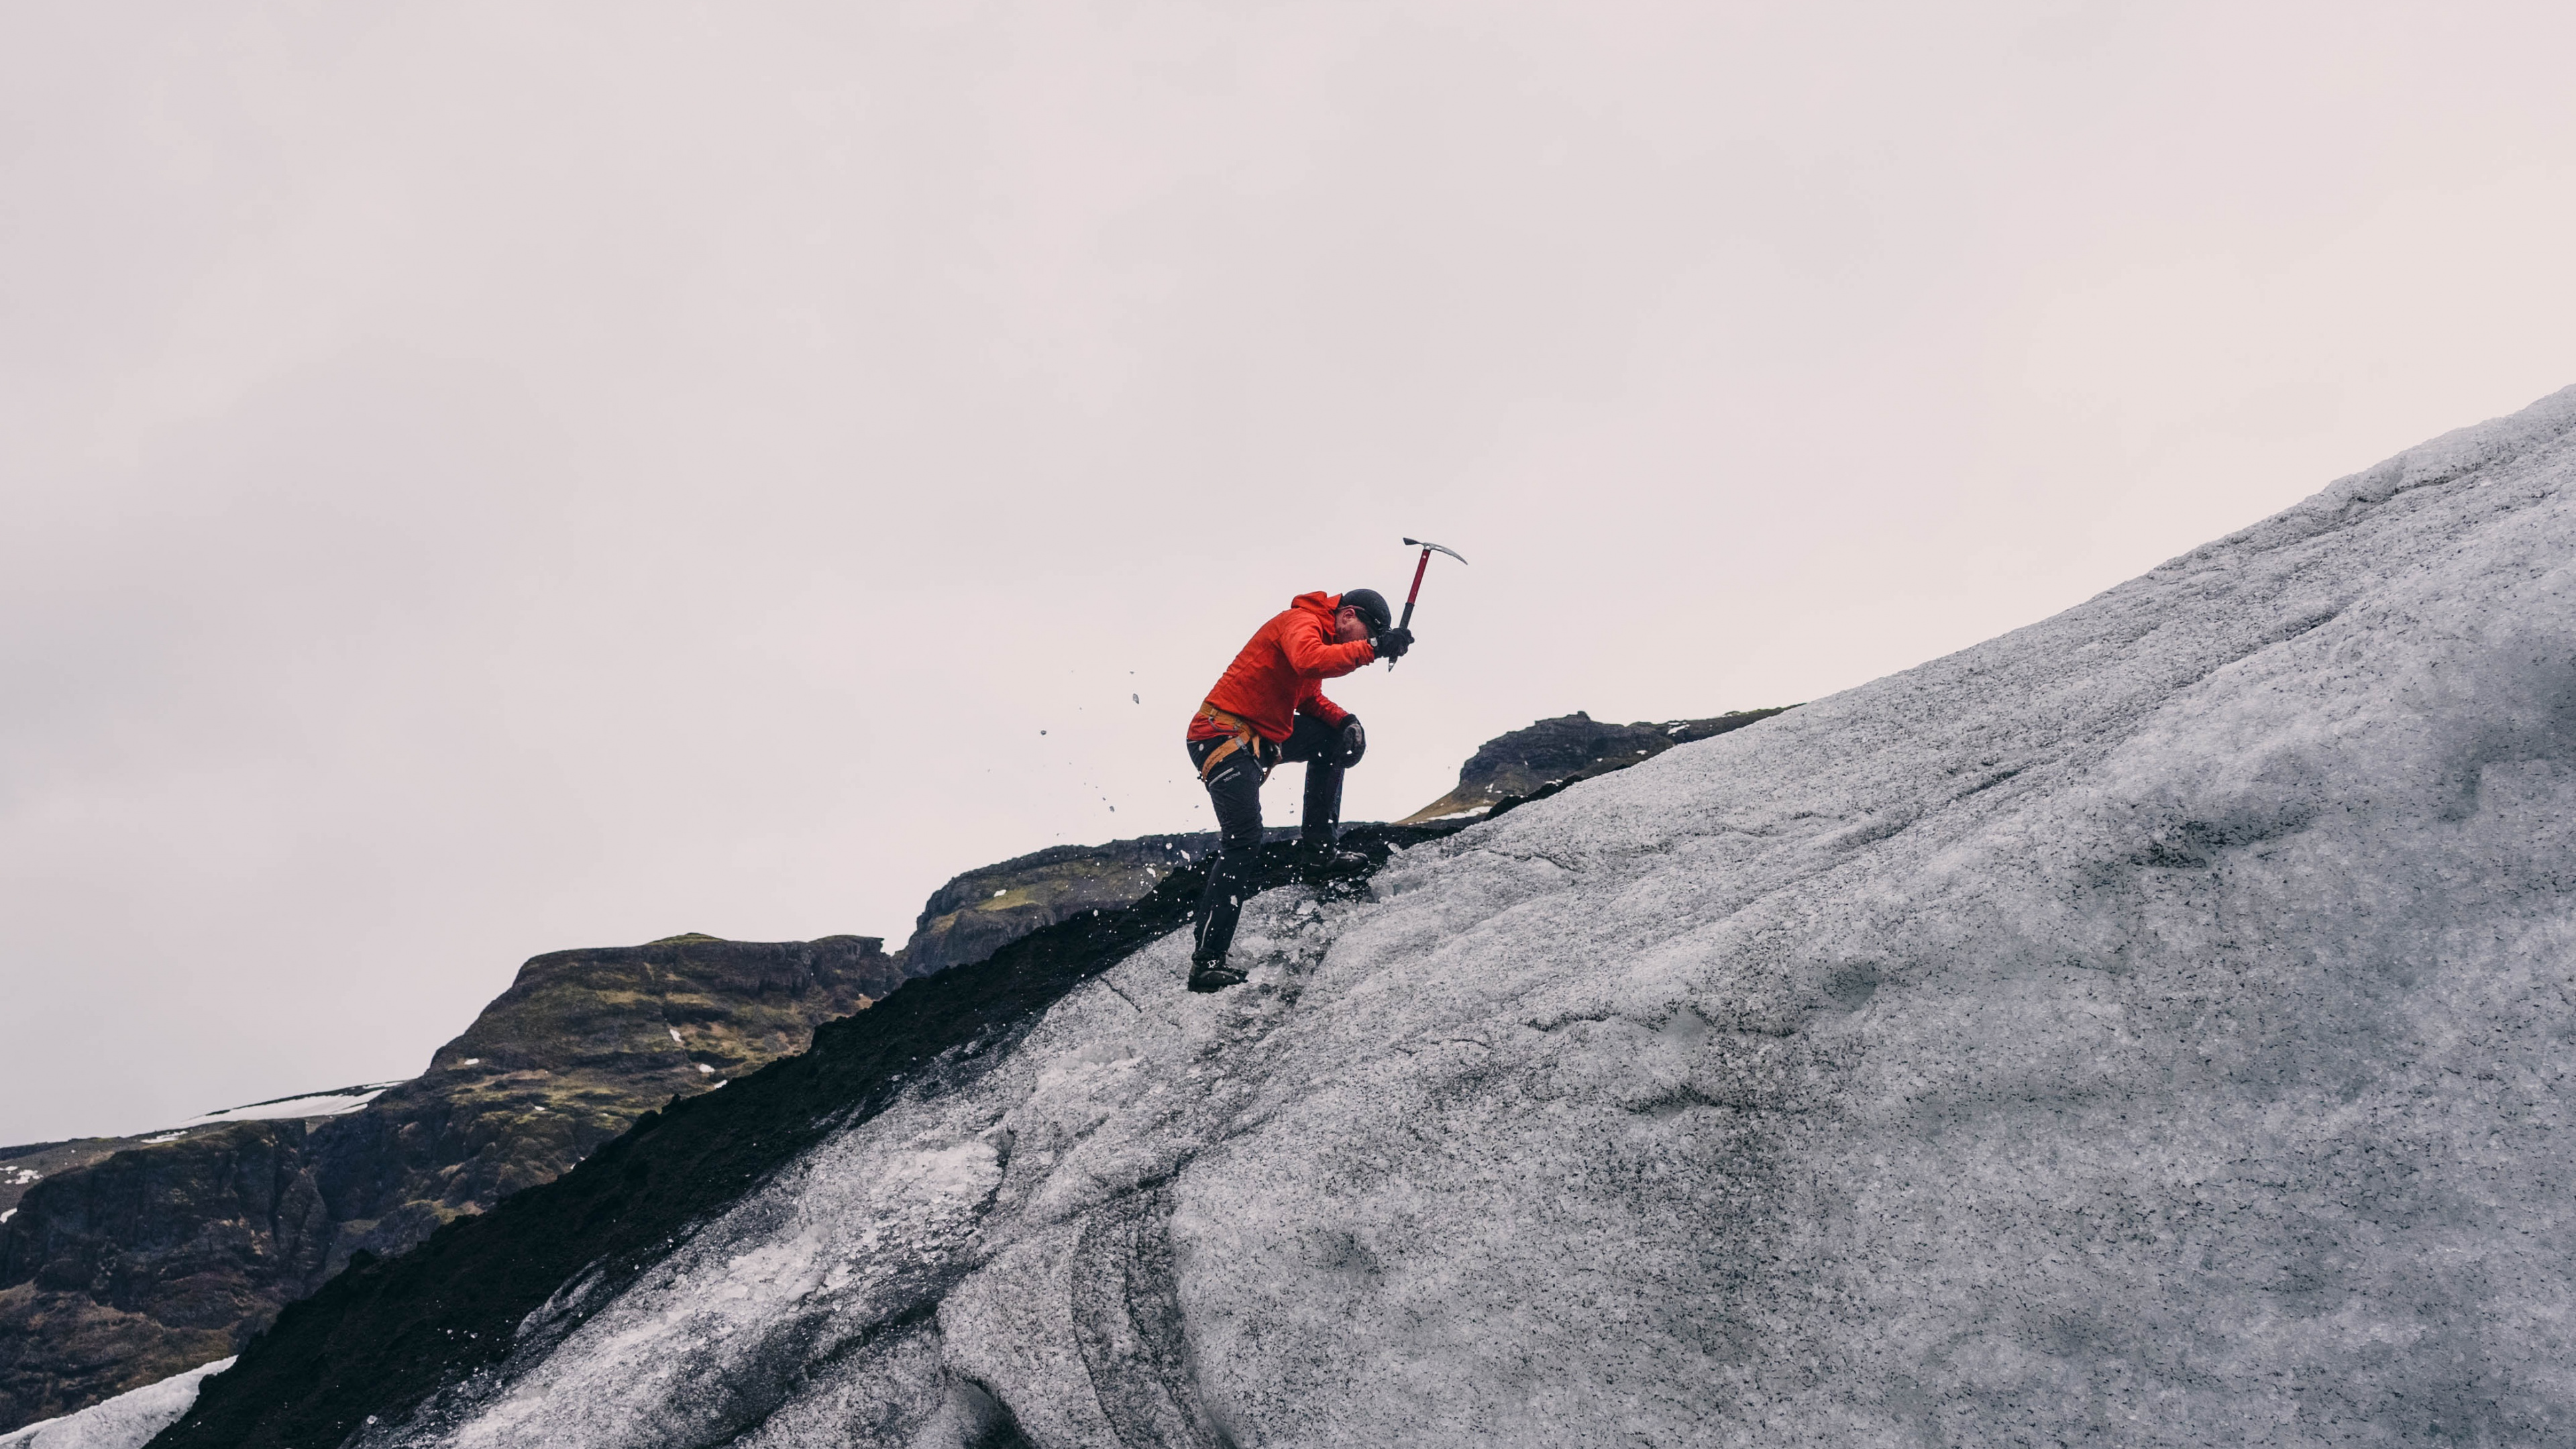 Person in Red Jacket and Black Pants Standing on Gray Rock Mountain During Daytime. Wallpaper in 3840x2160 Resolution